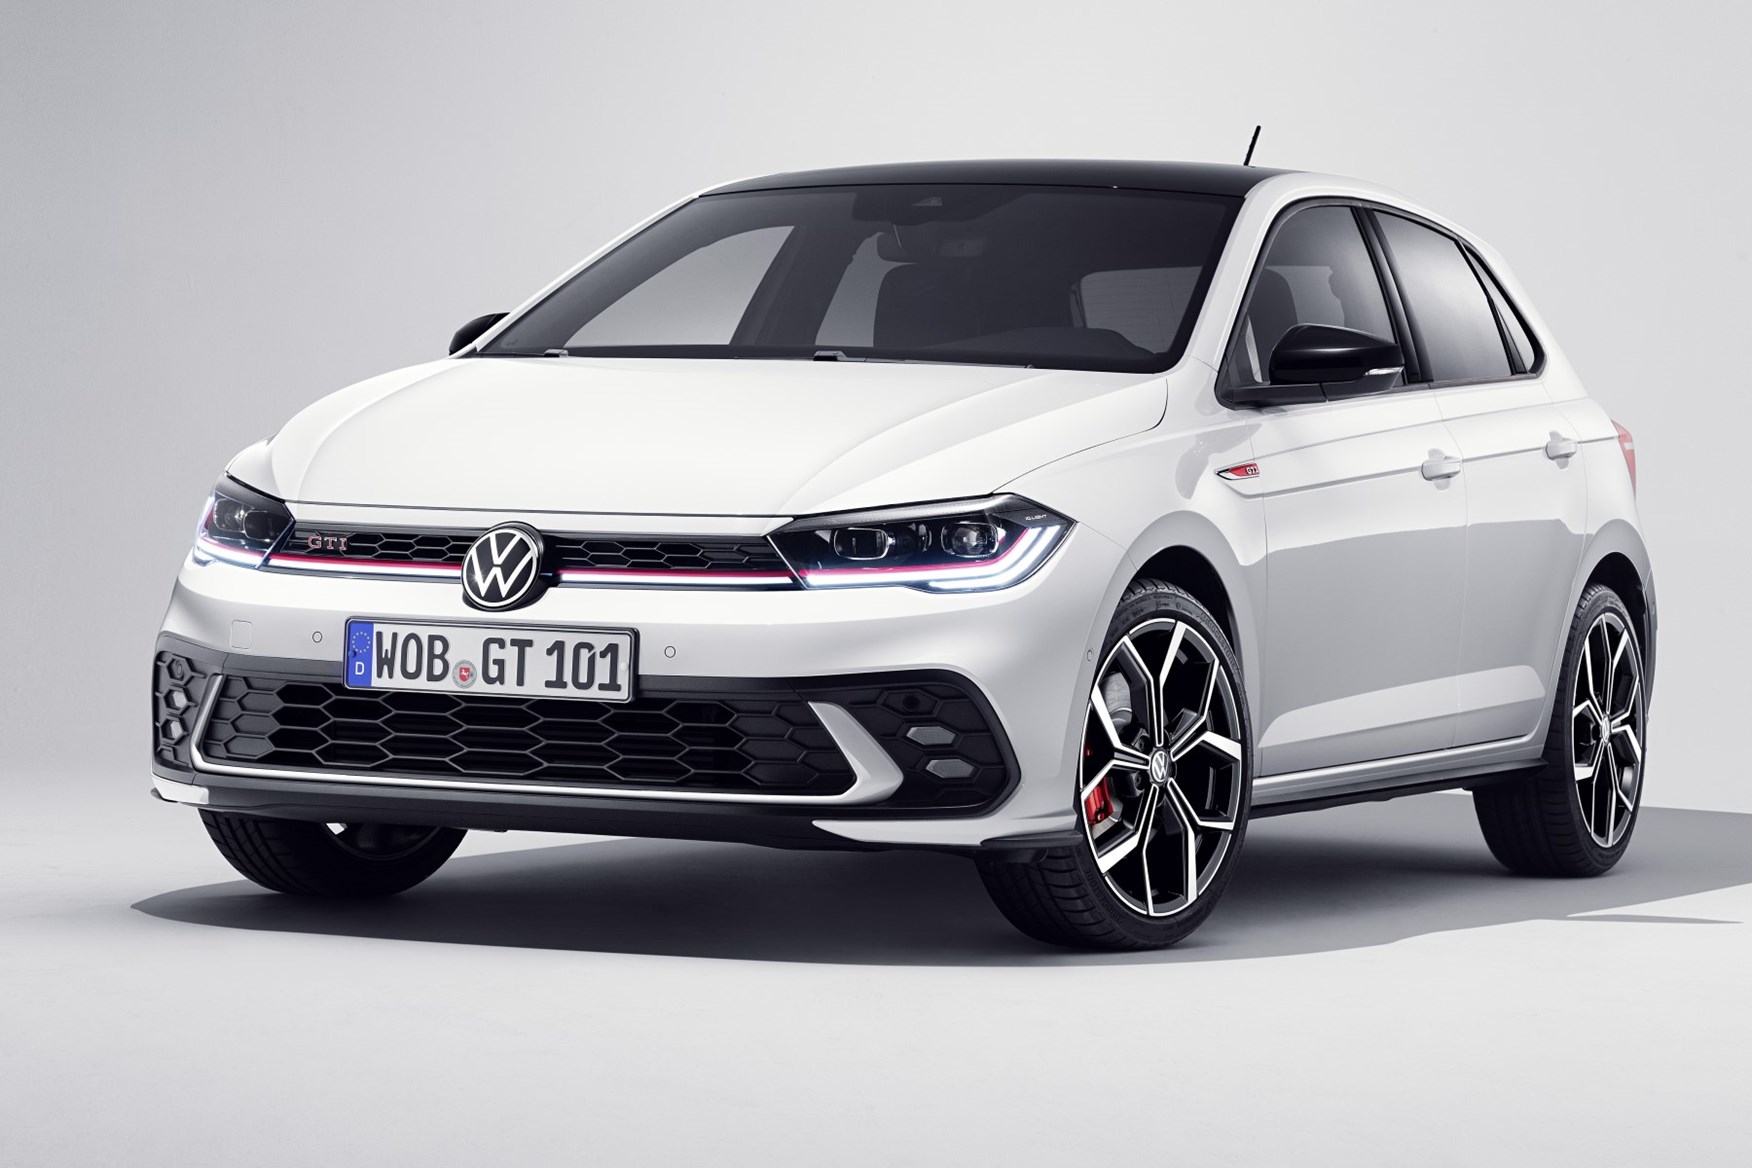 repertoire Mark Autorisatie VW Polo GTI: recently updated Polo has a 207bhot hatch to match | Parkers